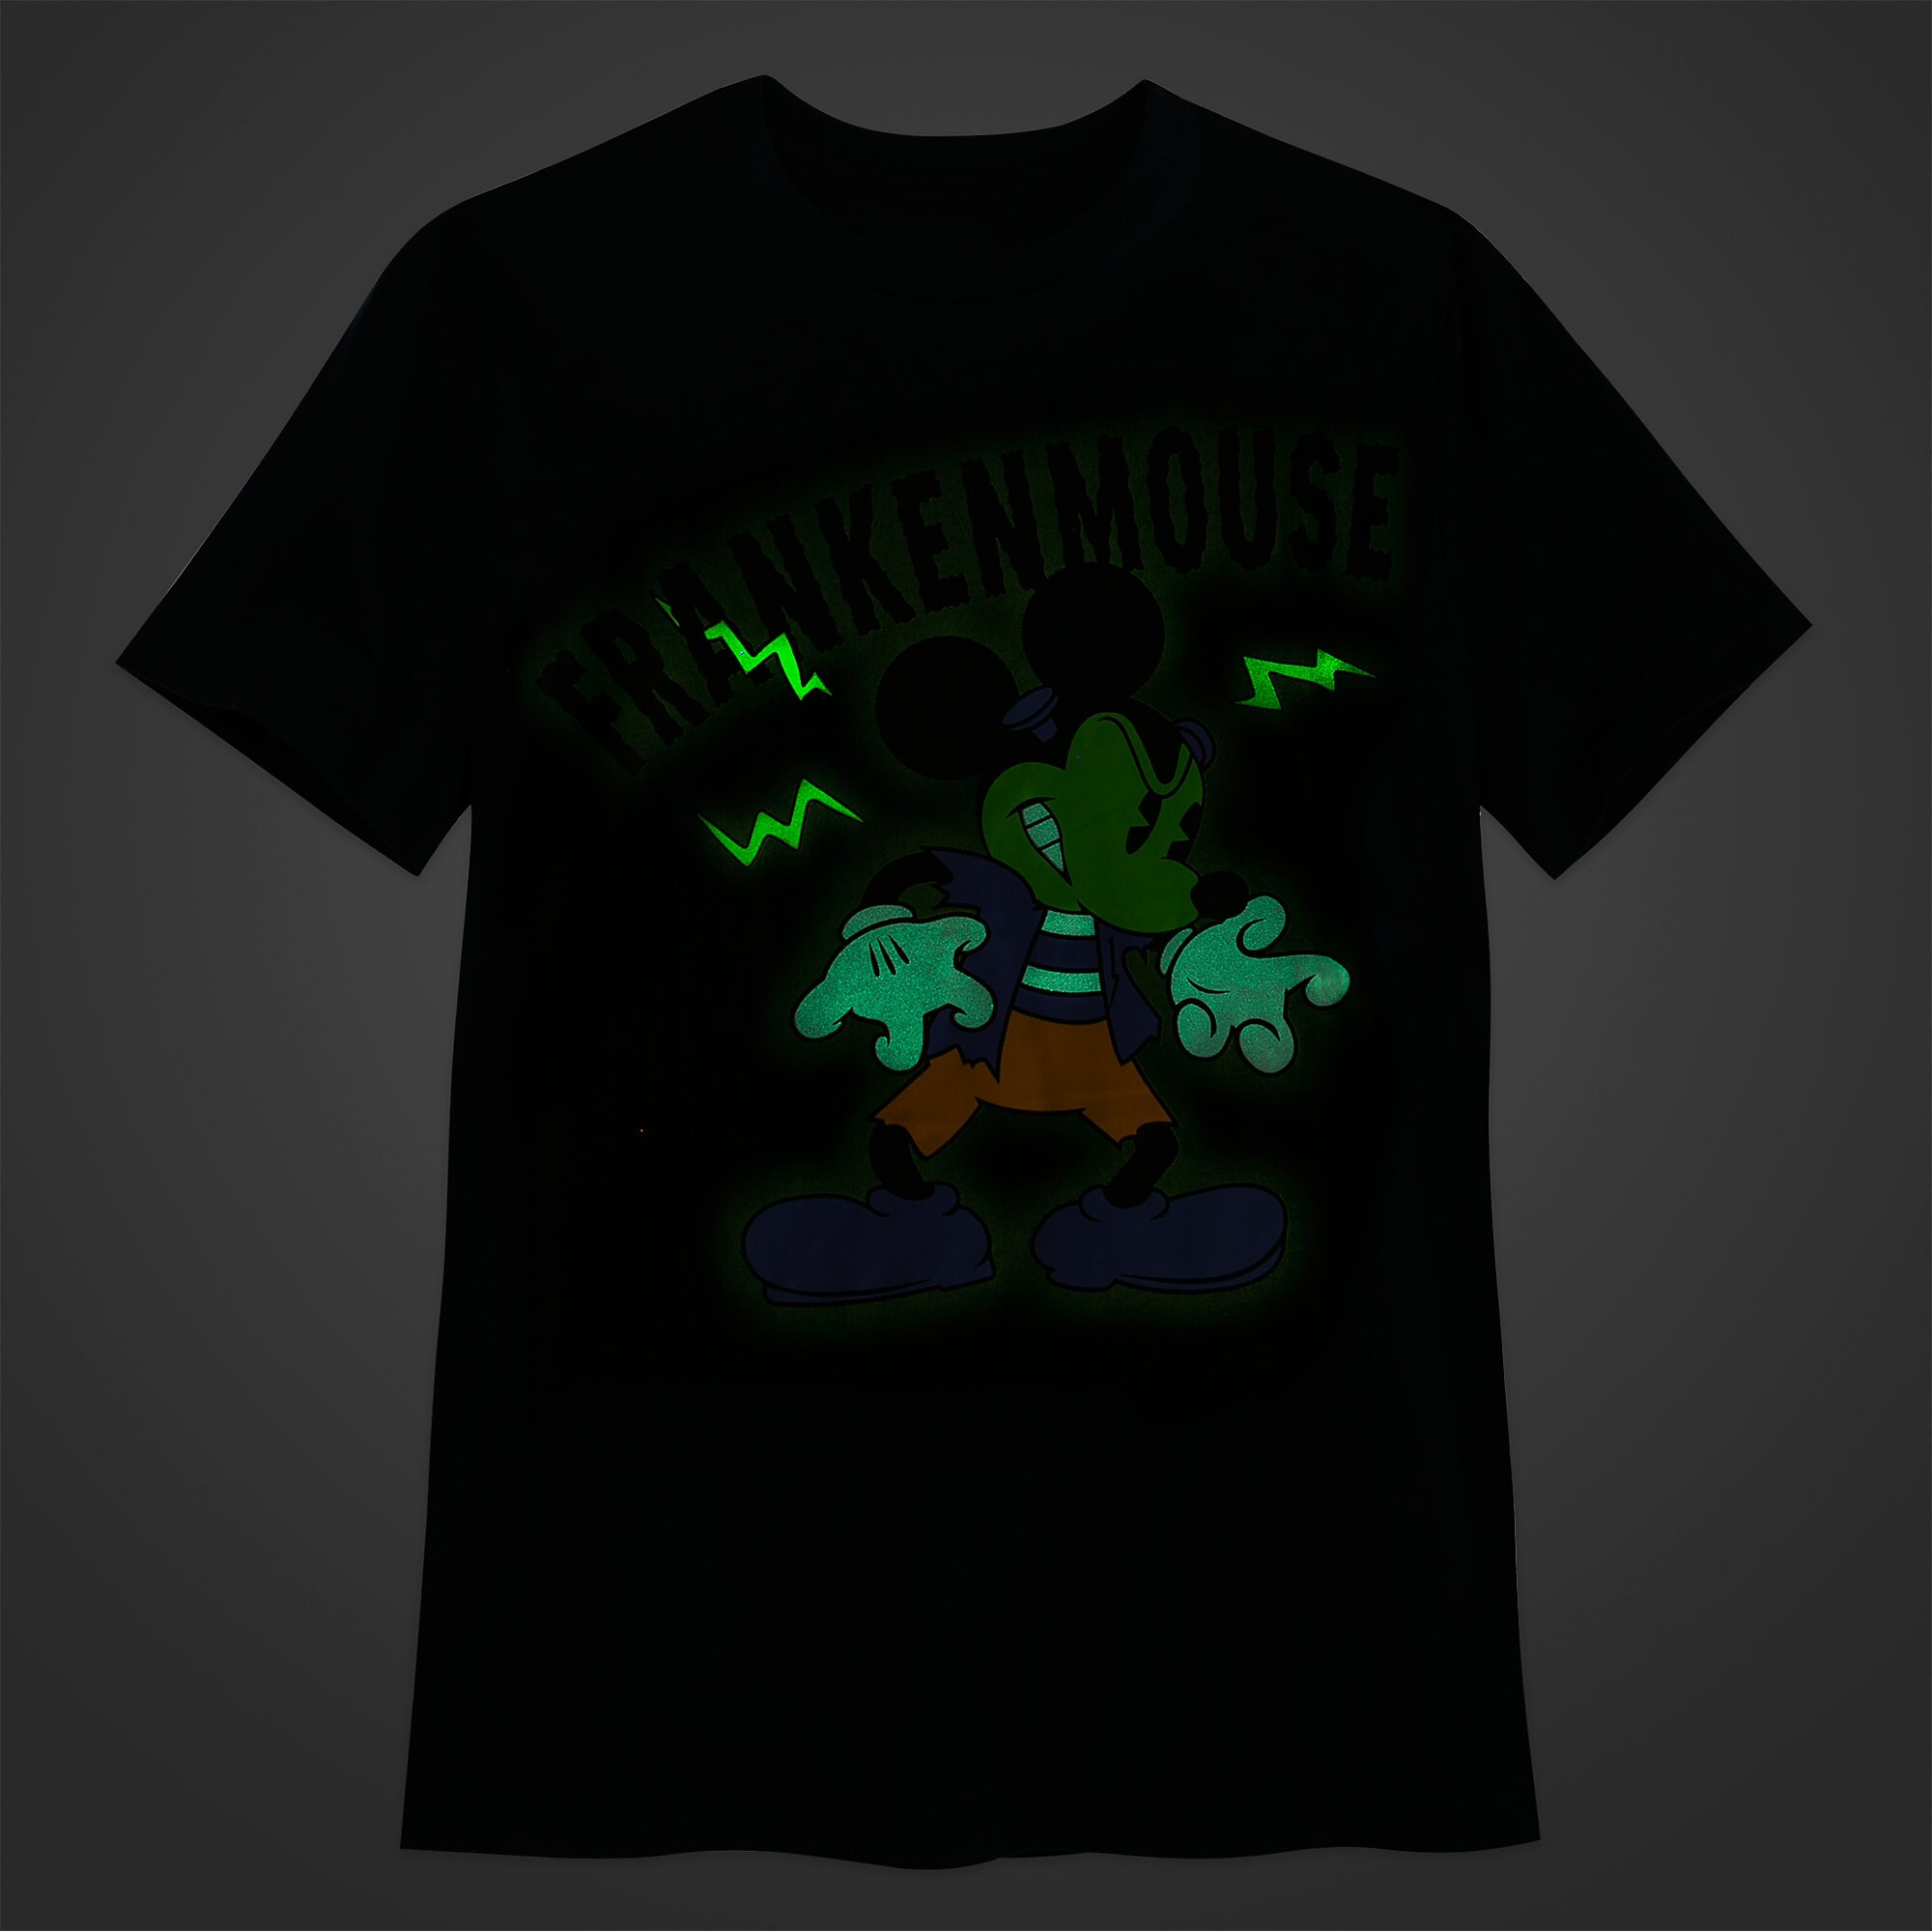 Mickey Mouse Halloween T-Shirt for Men